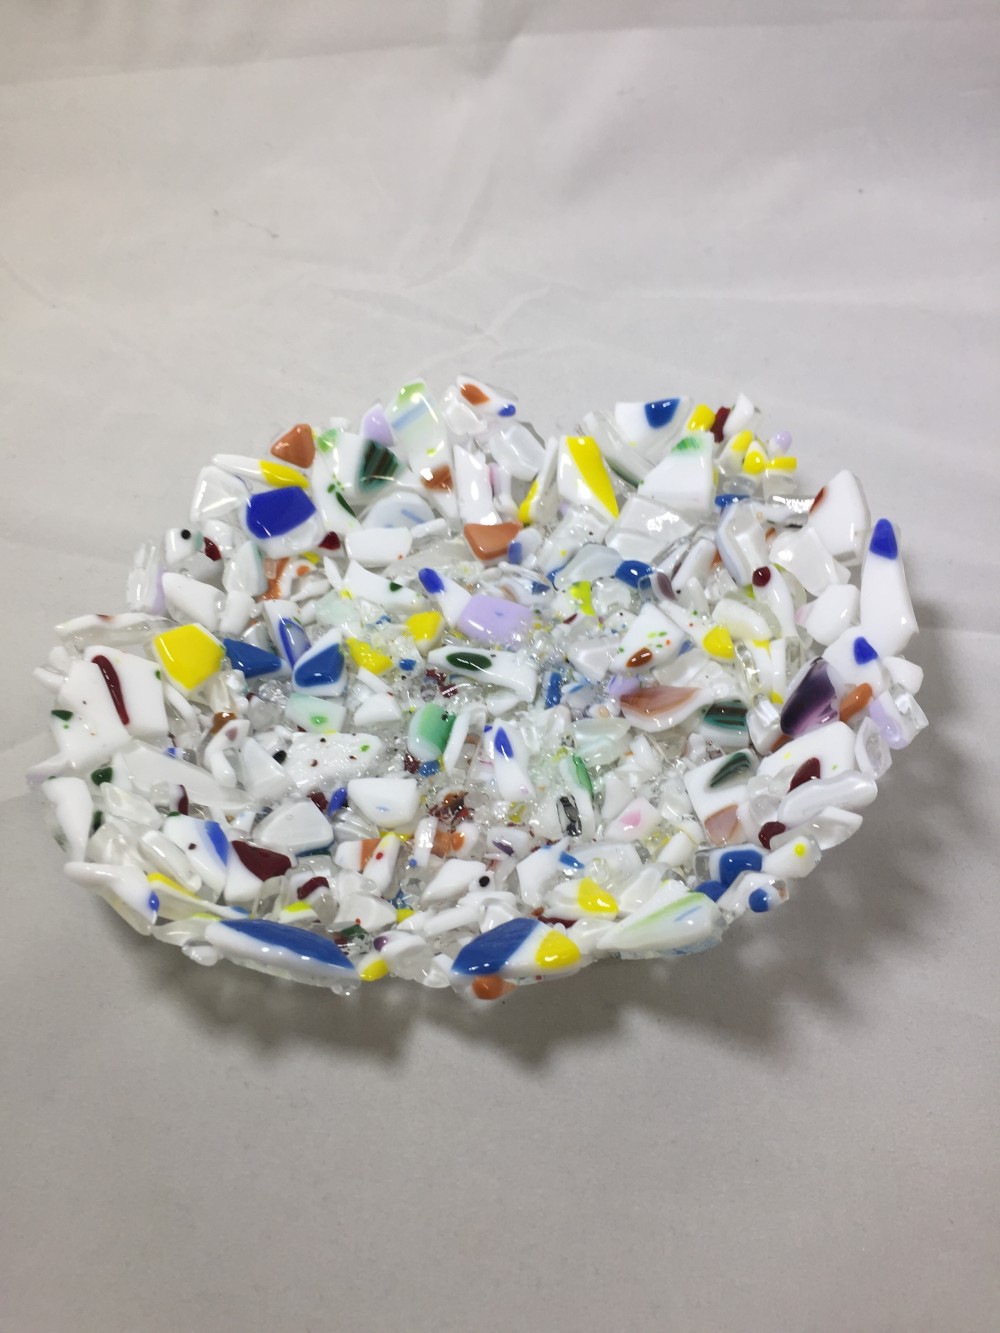 Fused glass plate - Fragments